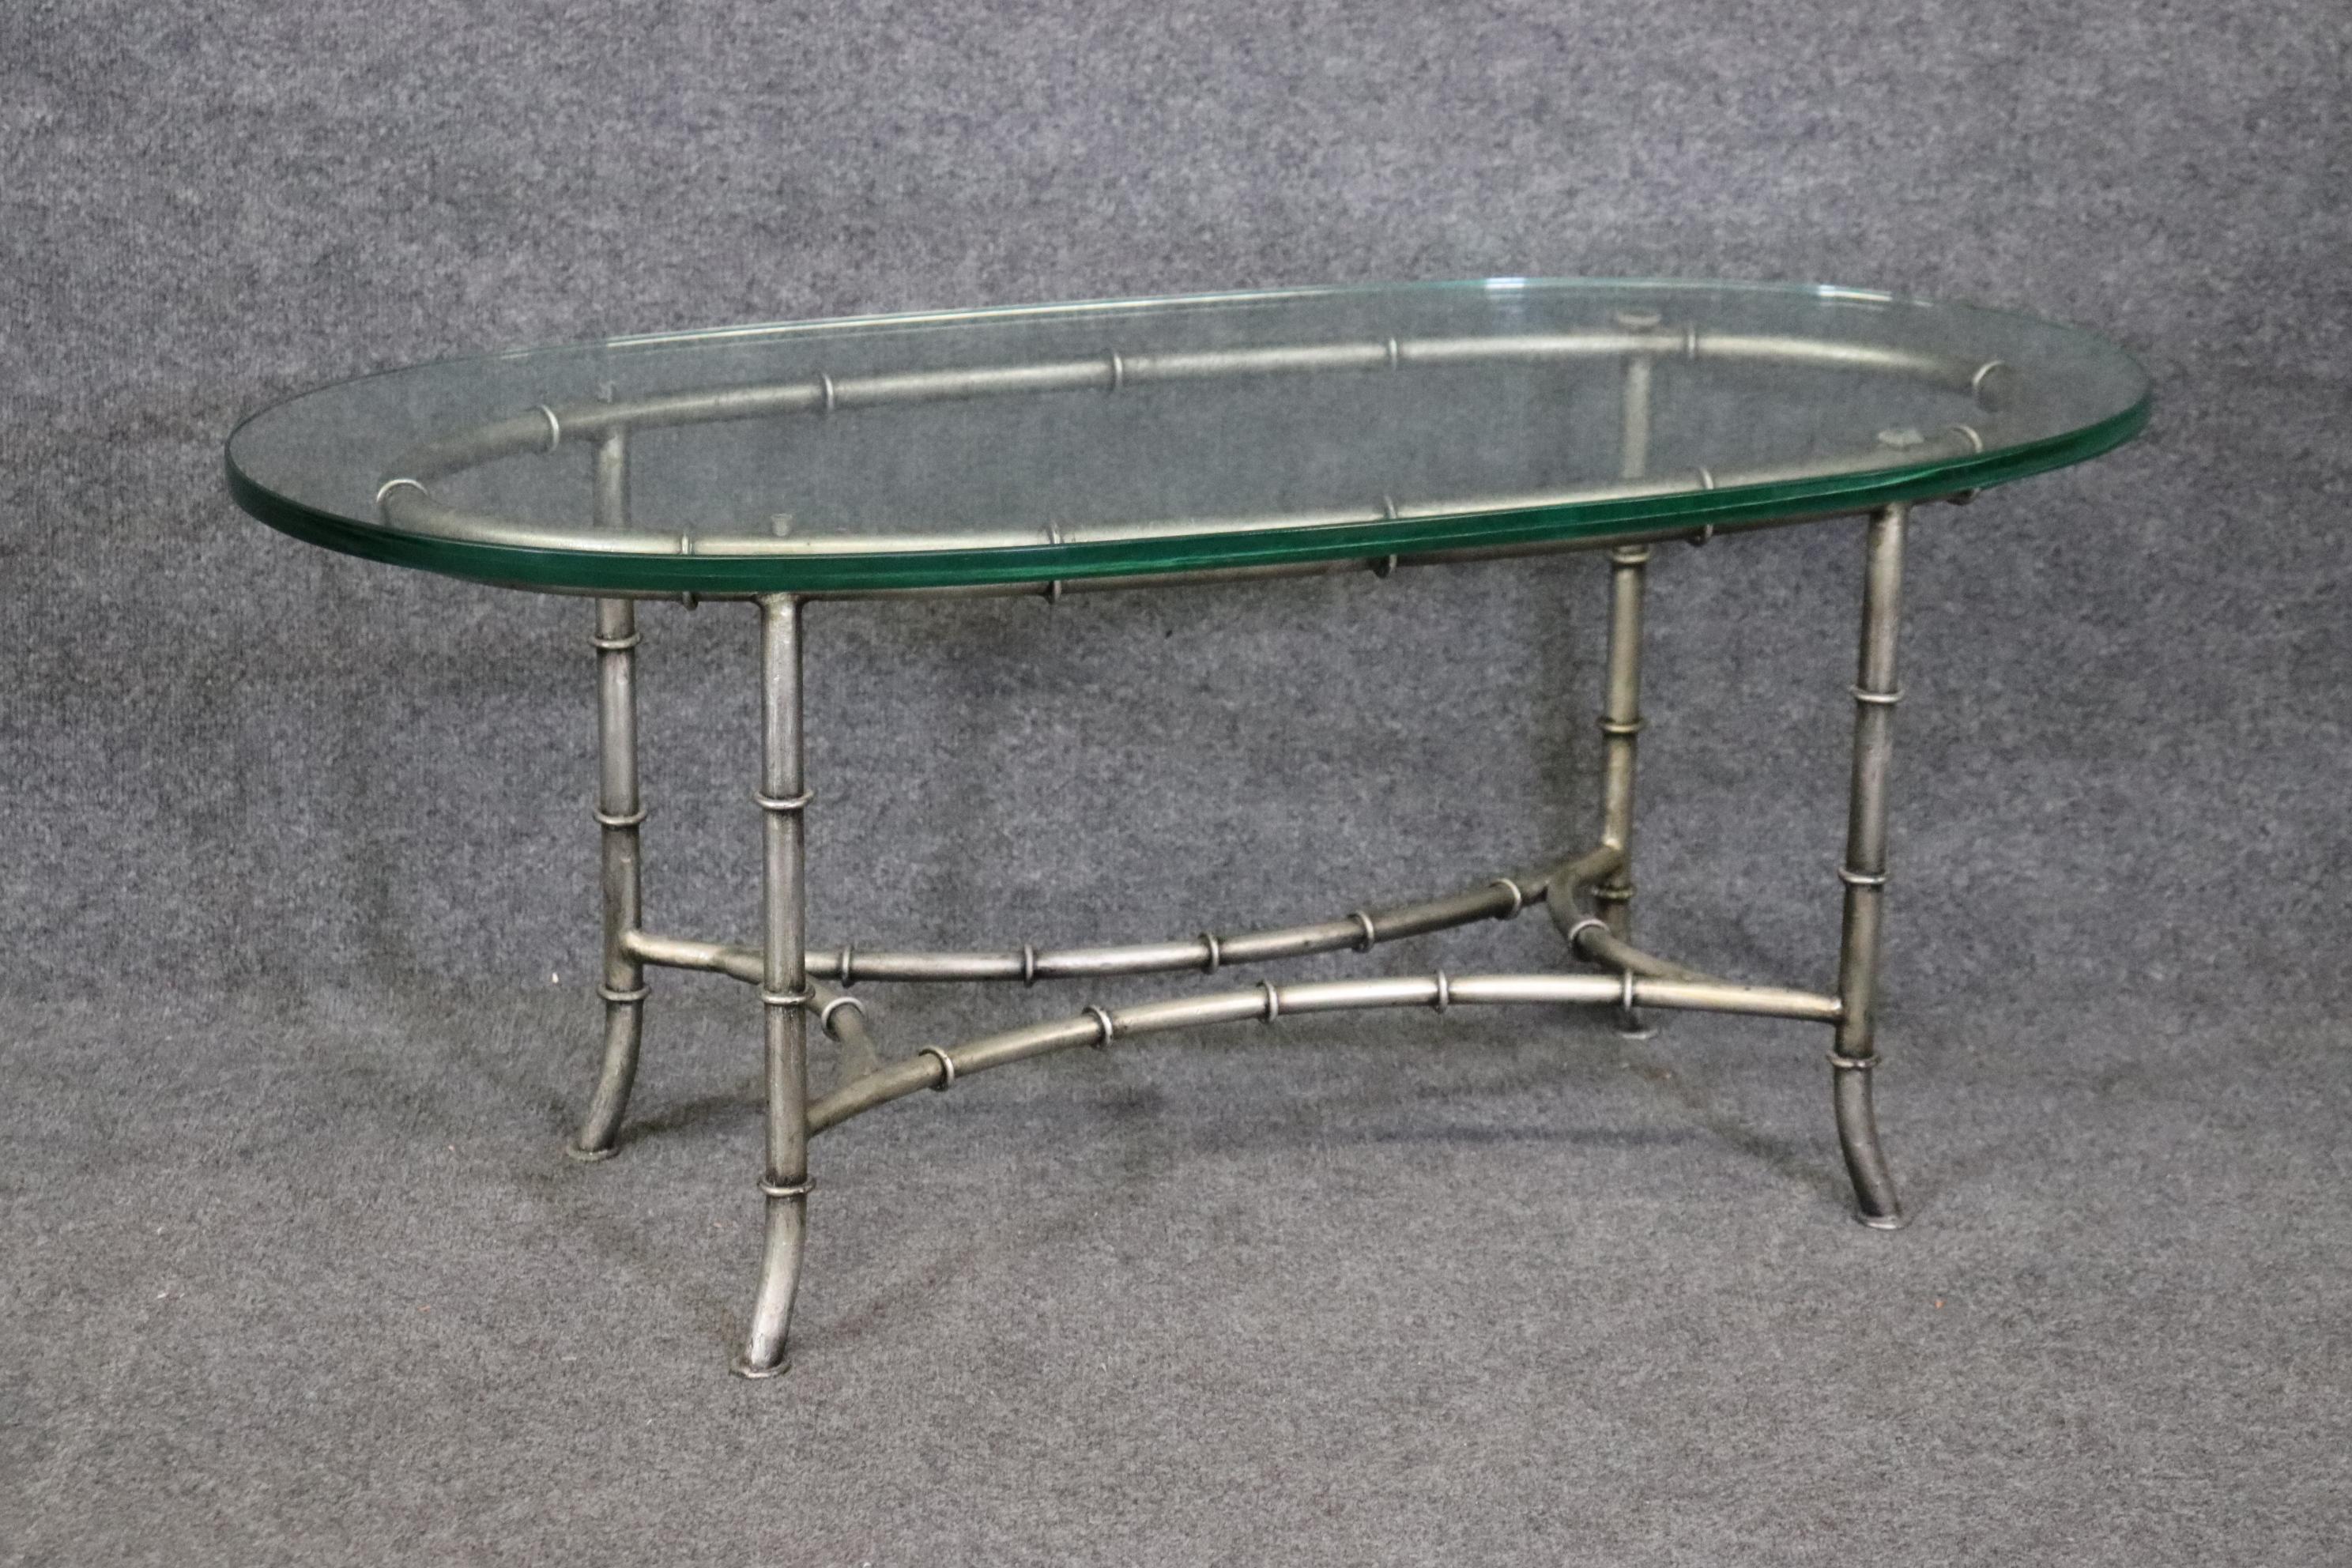 This is a gorgeous coffee table in the style of the French company Maison Bagues who made some beautiful faux bamboo coffee tables just like this one. The finish appears to be silver plated although I am not sure. The table is in good condition and